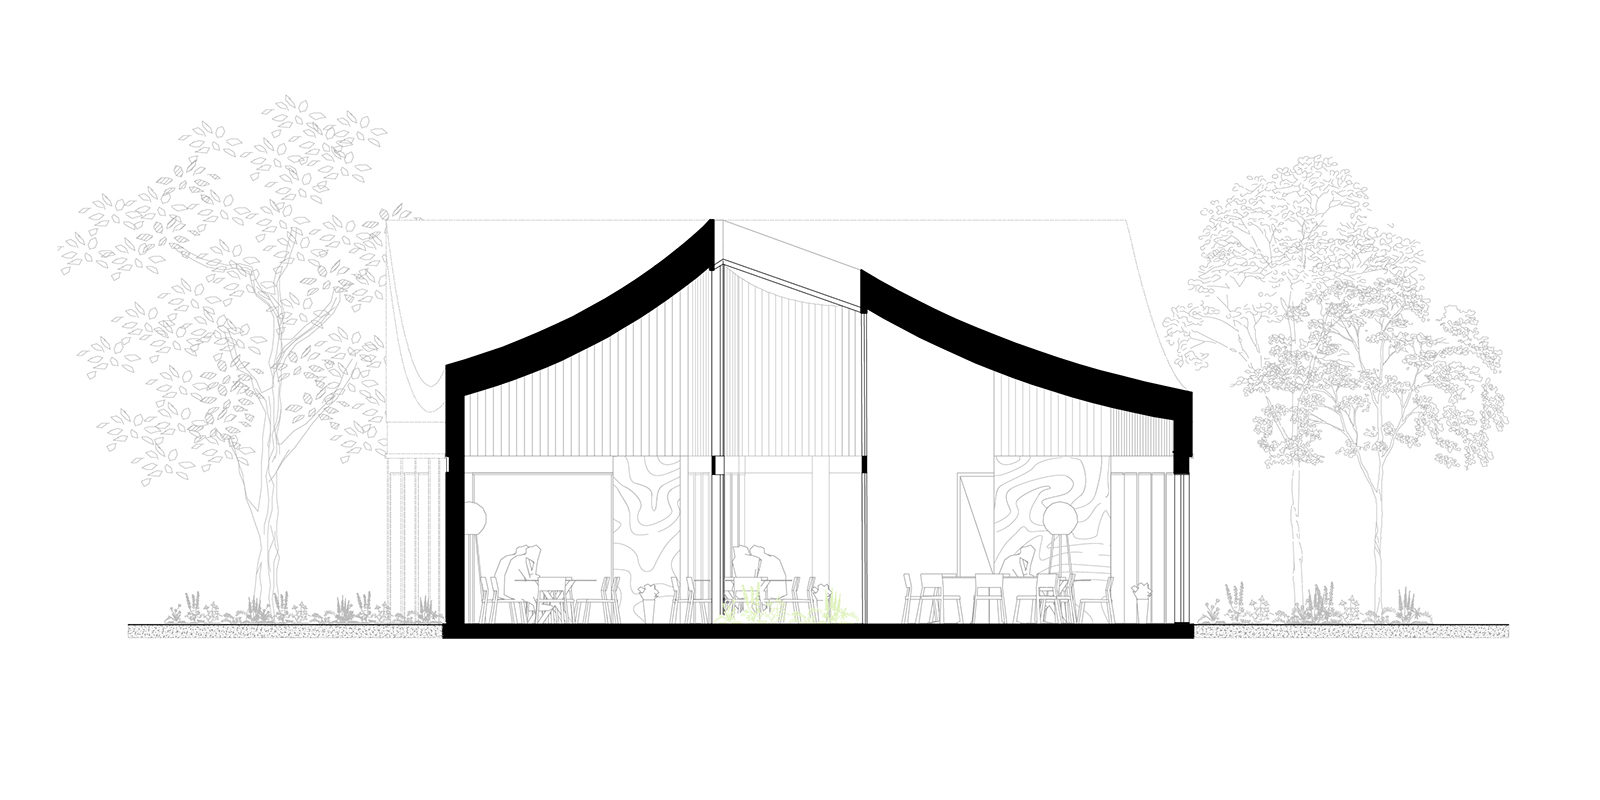 Archisearch MARQUEE: entry of Manousos Kakouris & Panagiotis Paximadas at the International Architectural Competition for WWF Observation Cabins in Tuscany by Young Architects Competitions